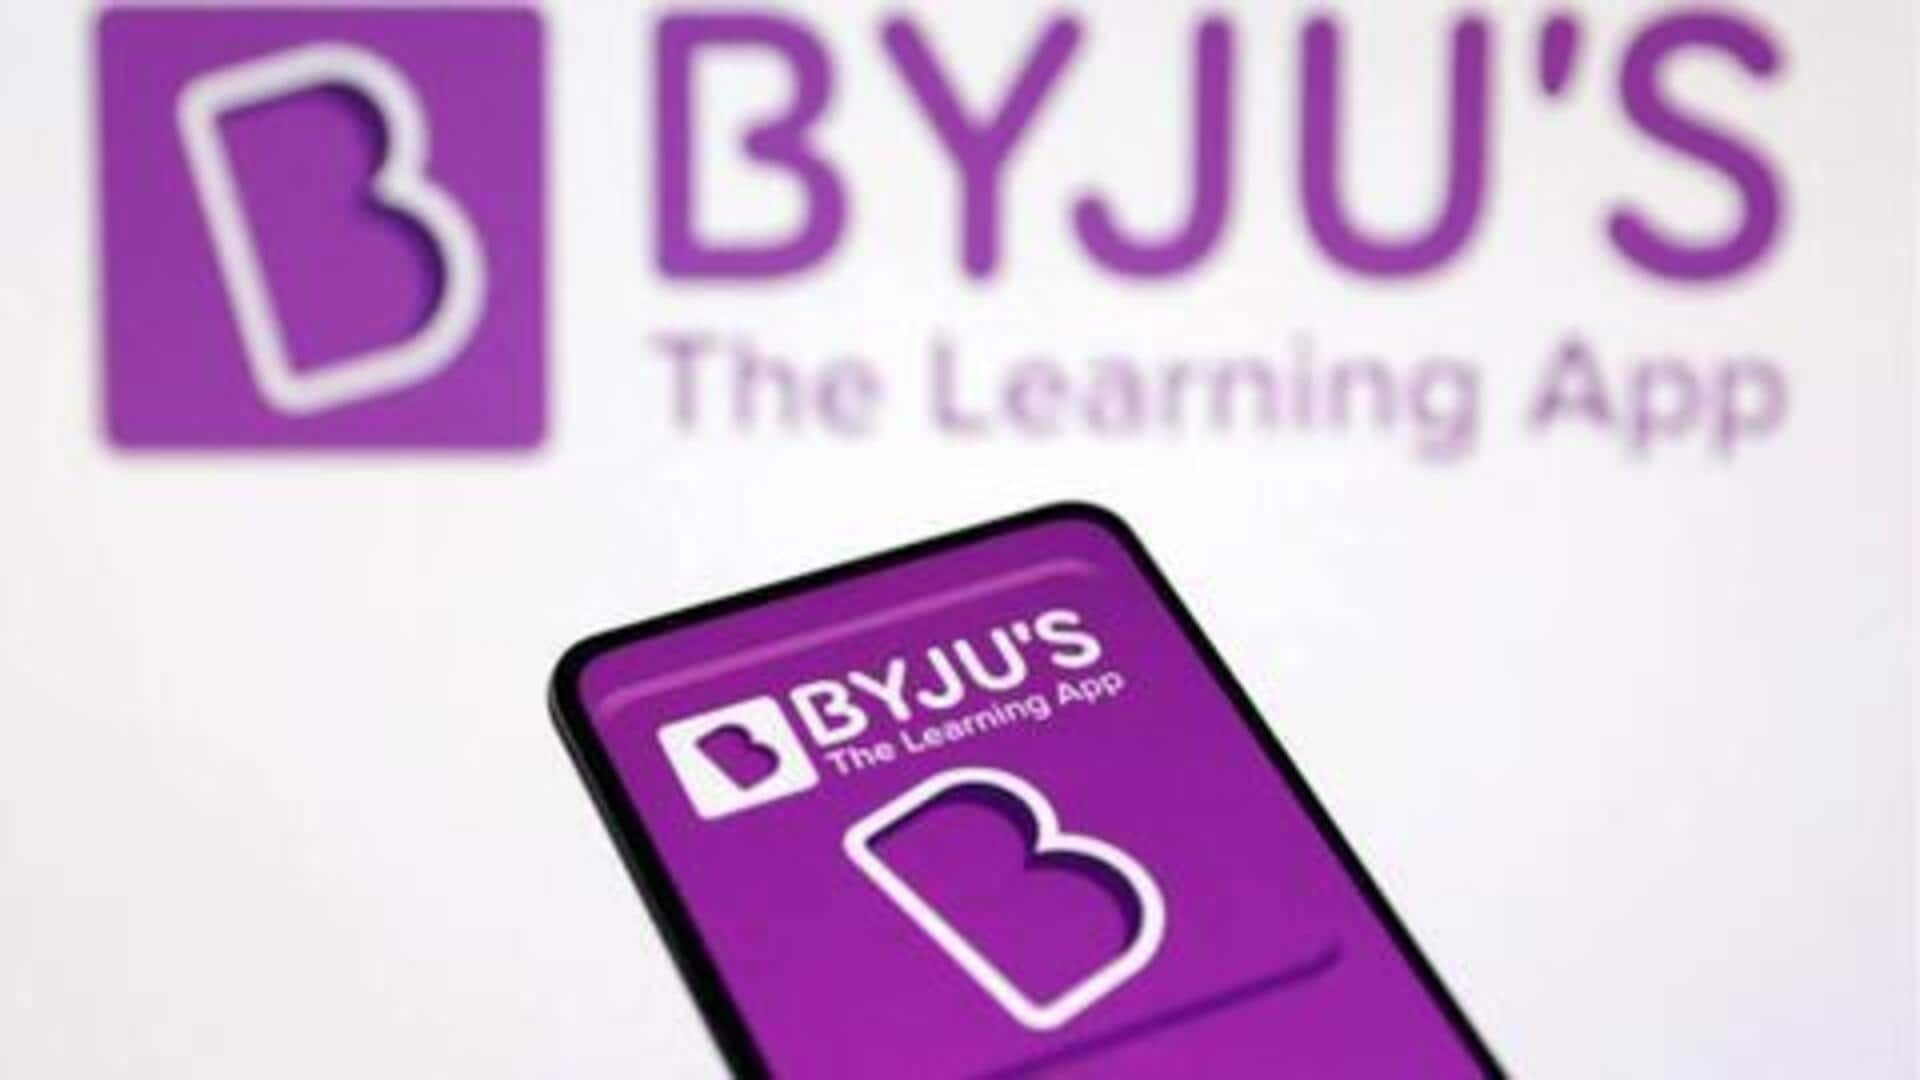 NCLT serves 3 notices to BYJU'S over unpaid dues